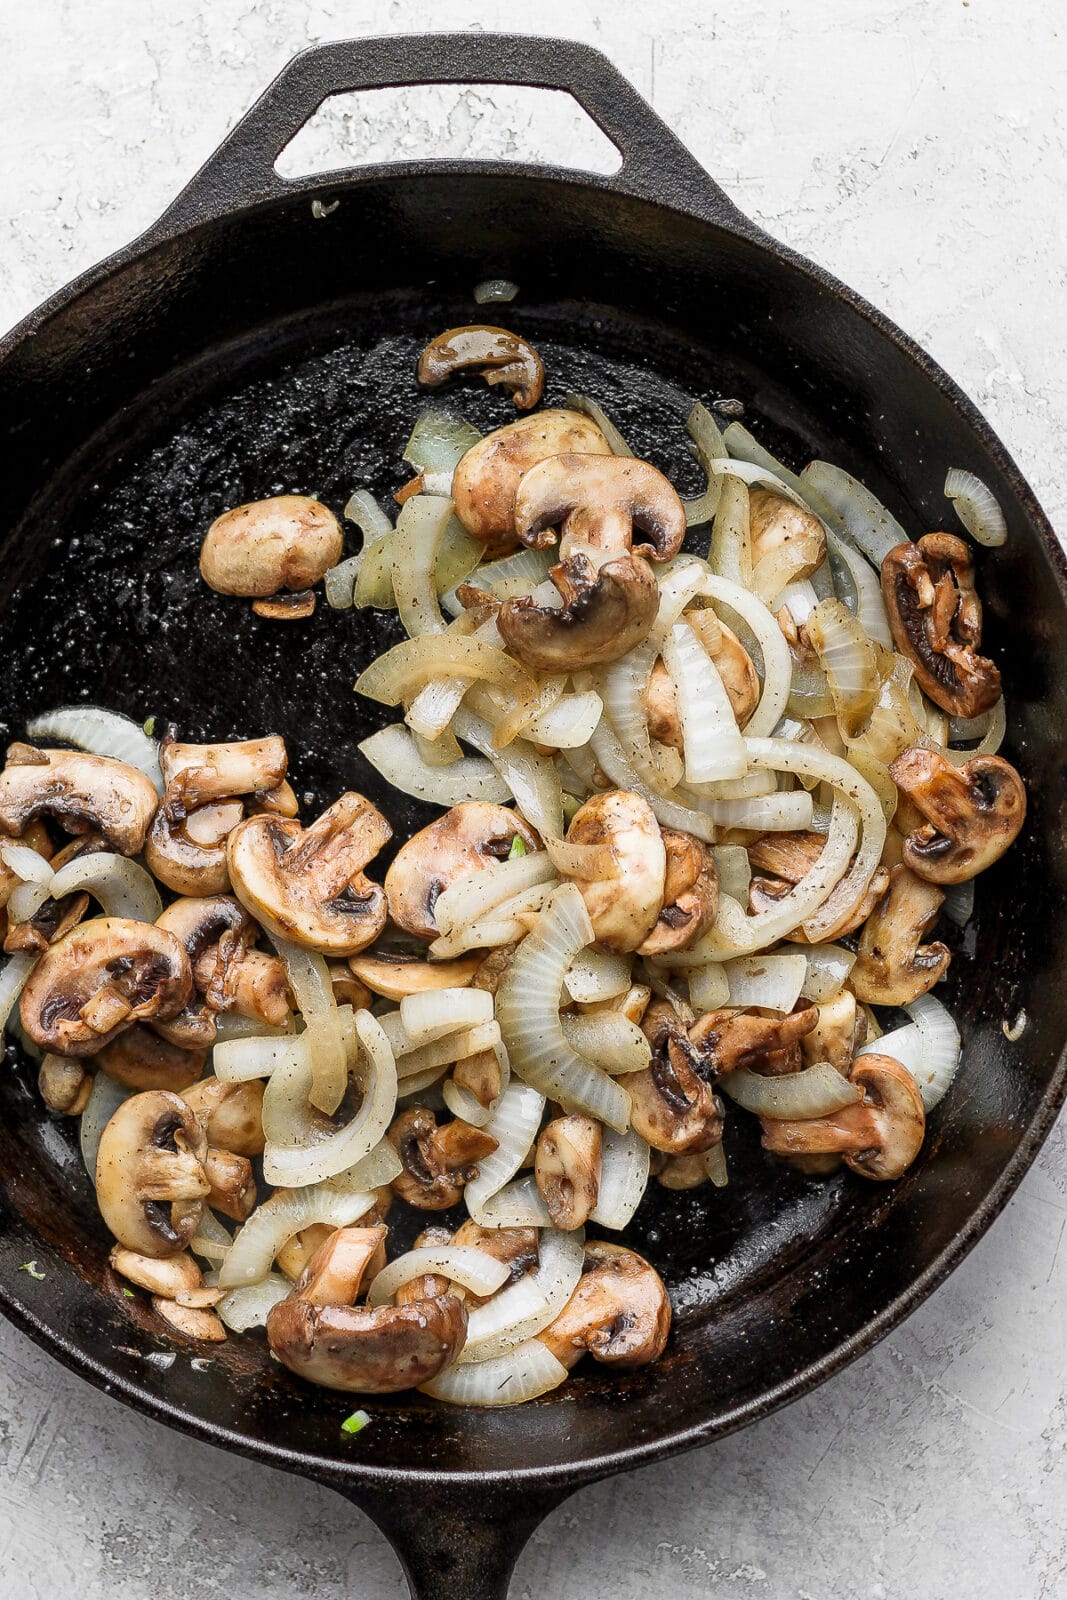 Cast iron pan with sautéed onions and mushrooms.